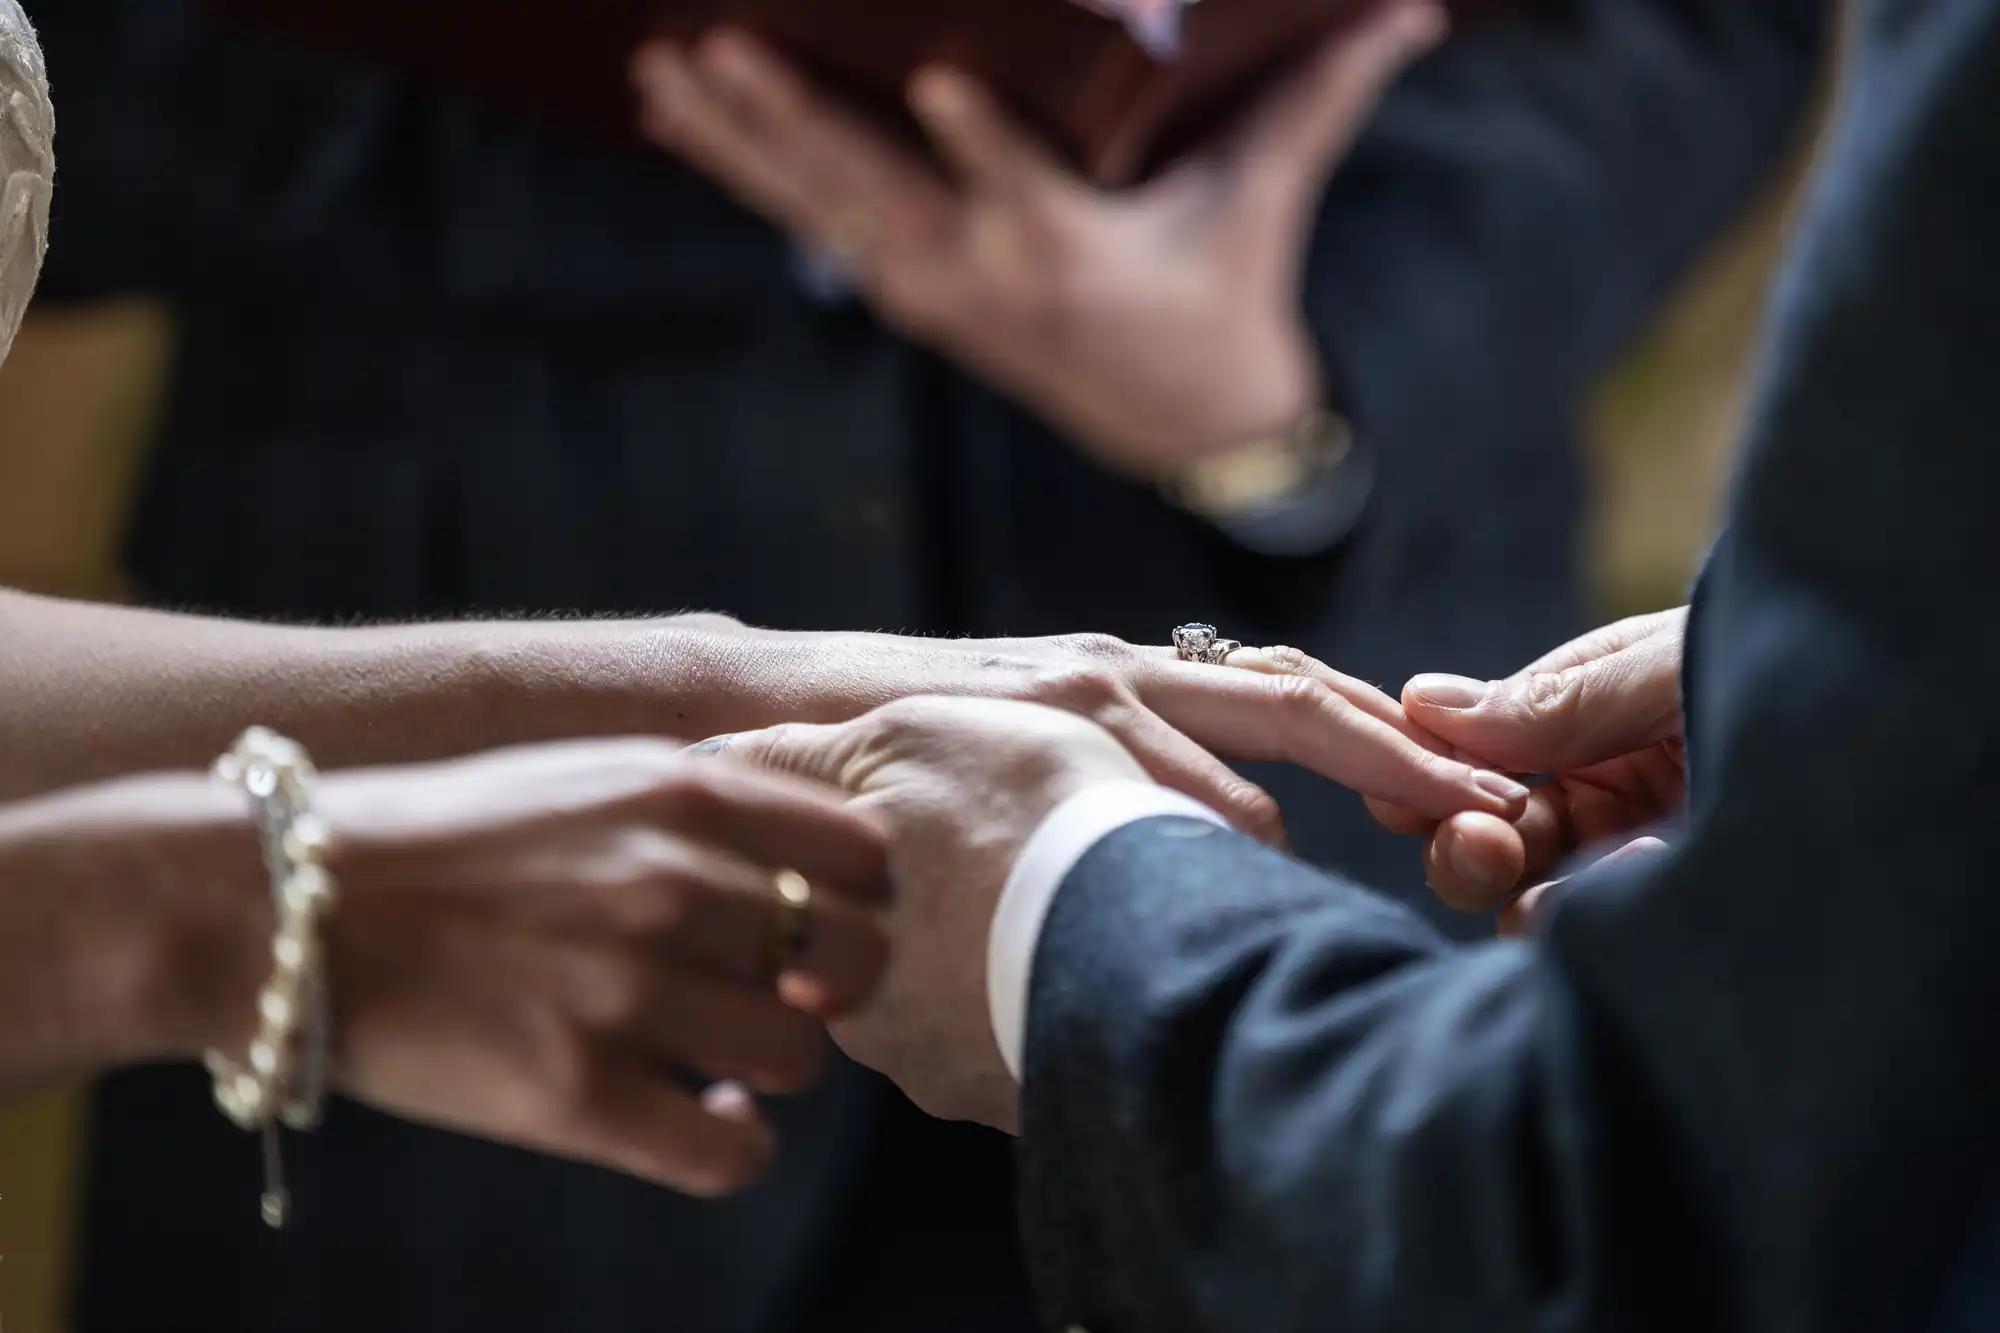 Close-up of a person placing a ring on another person's finger during a ceremony, with the officiant holding a book in the background.